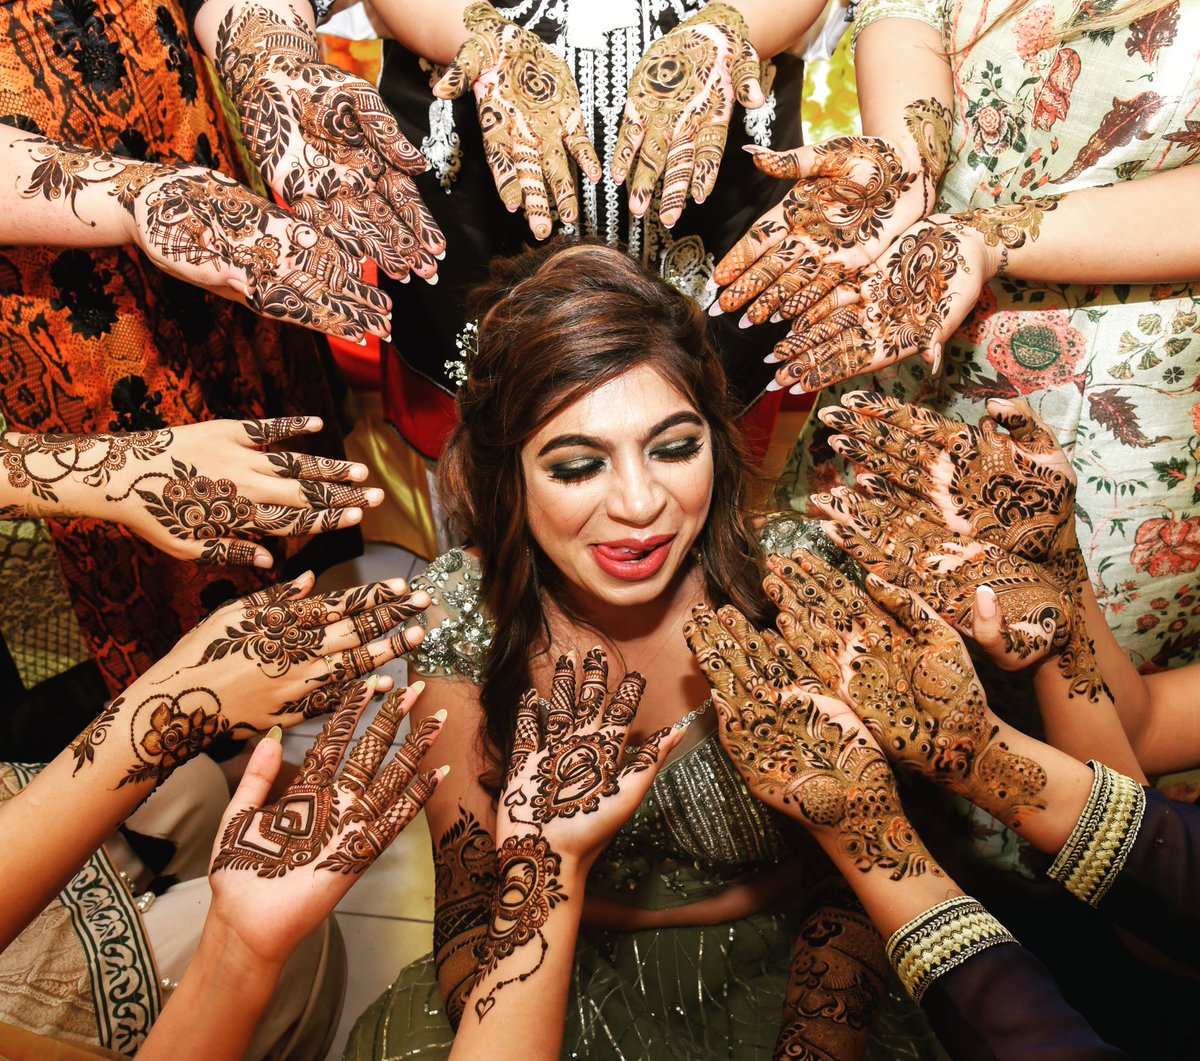 HERE COMES THE BRIDE... Join the mehendi party by painting your hands green and the town red.
A smile happens in a flash, it's memories last a lifetime.
 #mumbaiweddings #weddingtrends #weddingbiz #weddingvibes #weddingplanner #weddinggoals #photograpy #weddingphotography